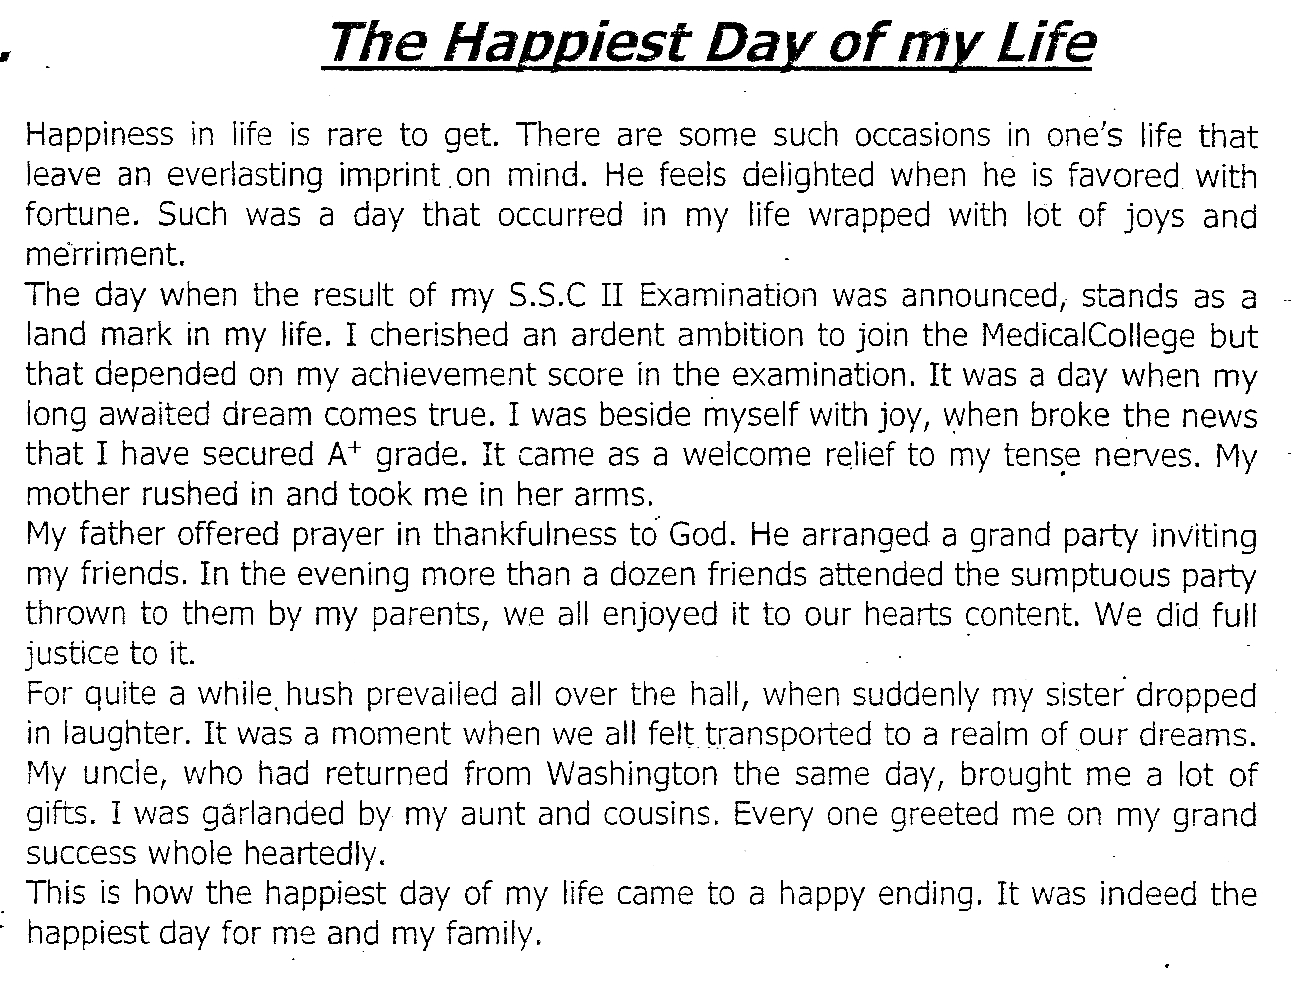 happiest day of my life essay on